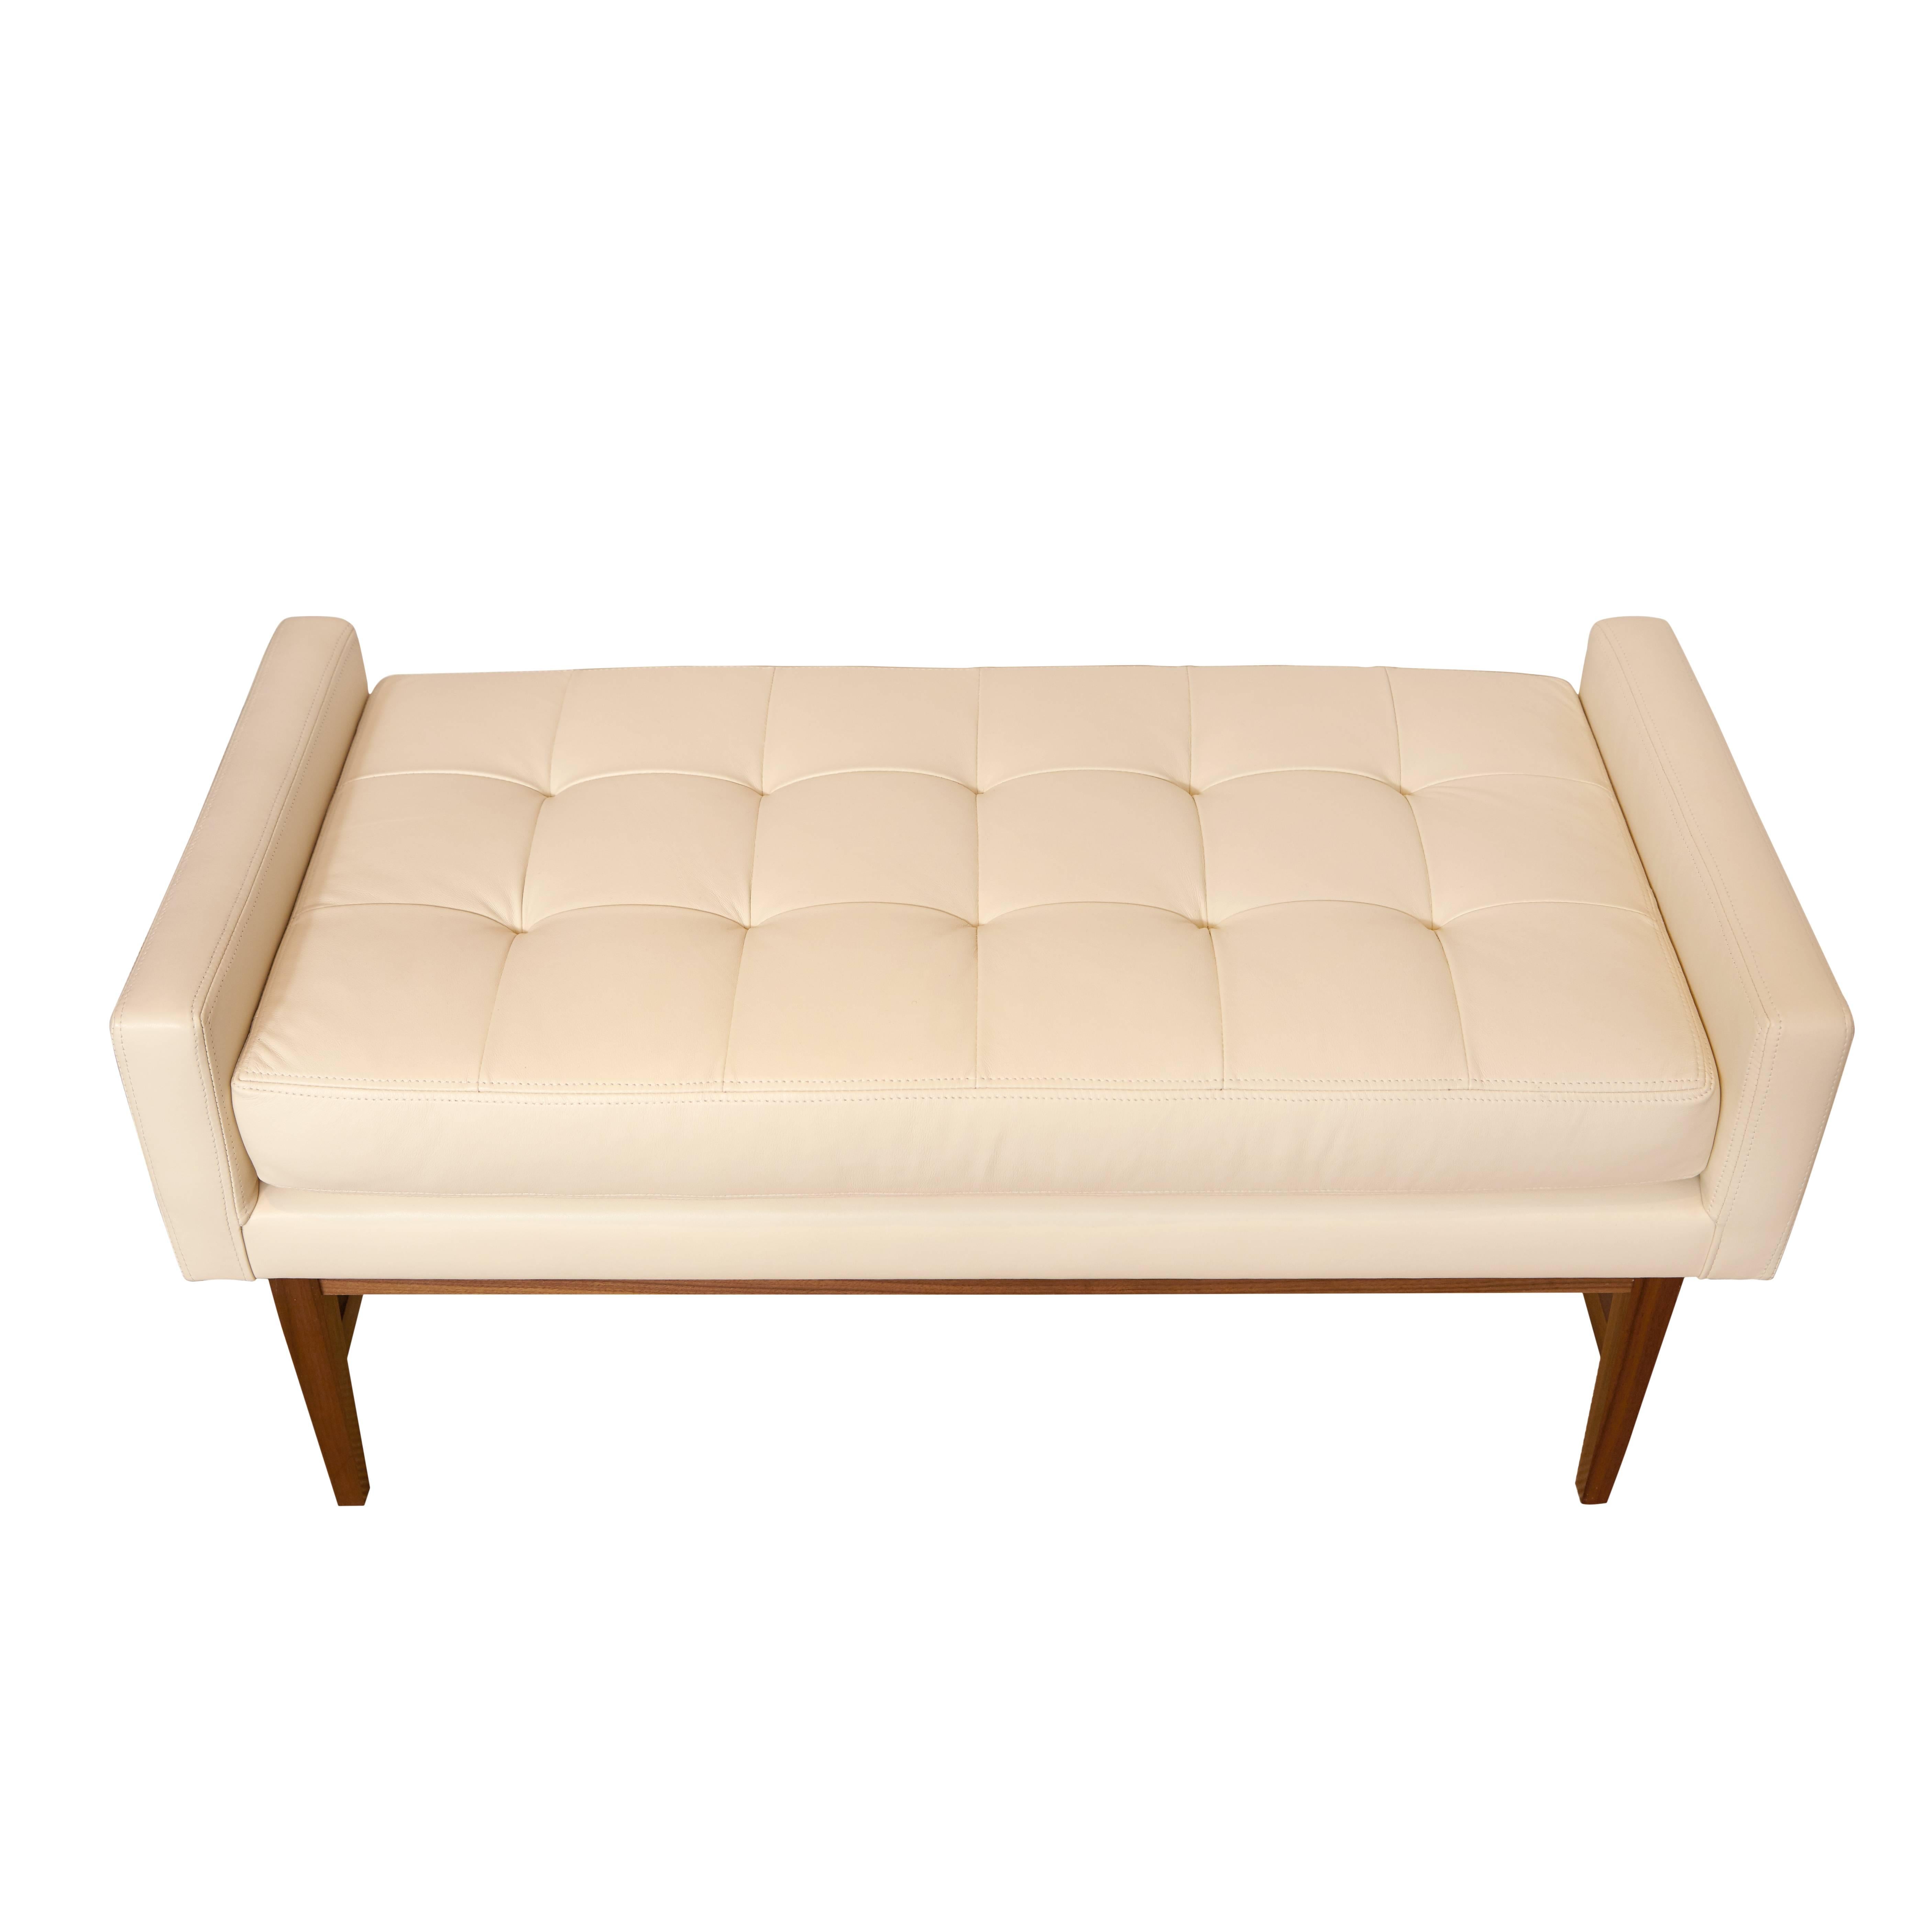 Mid-Century Modern Bailey Tufted Bench For Sale